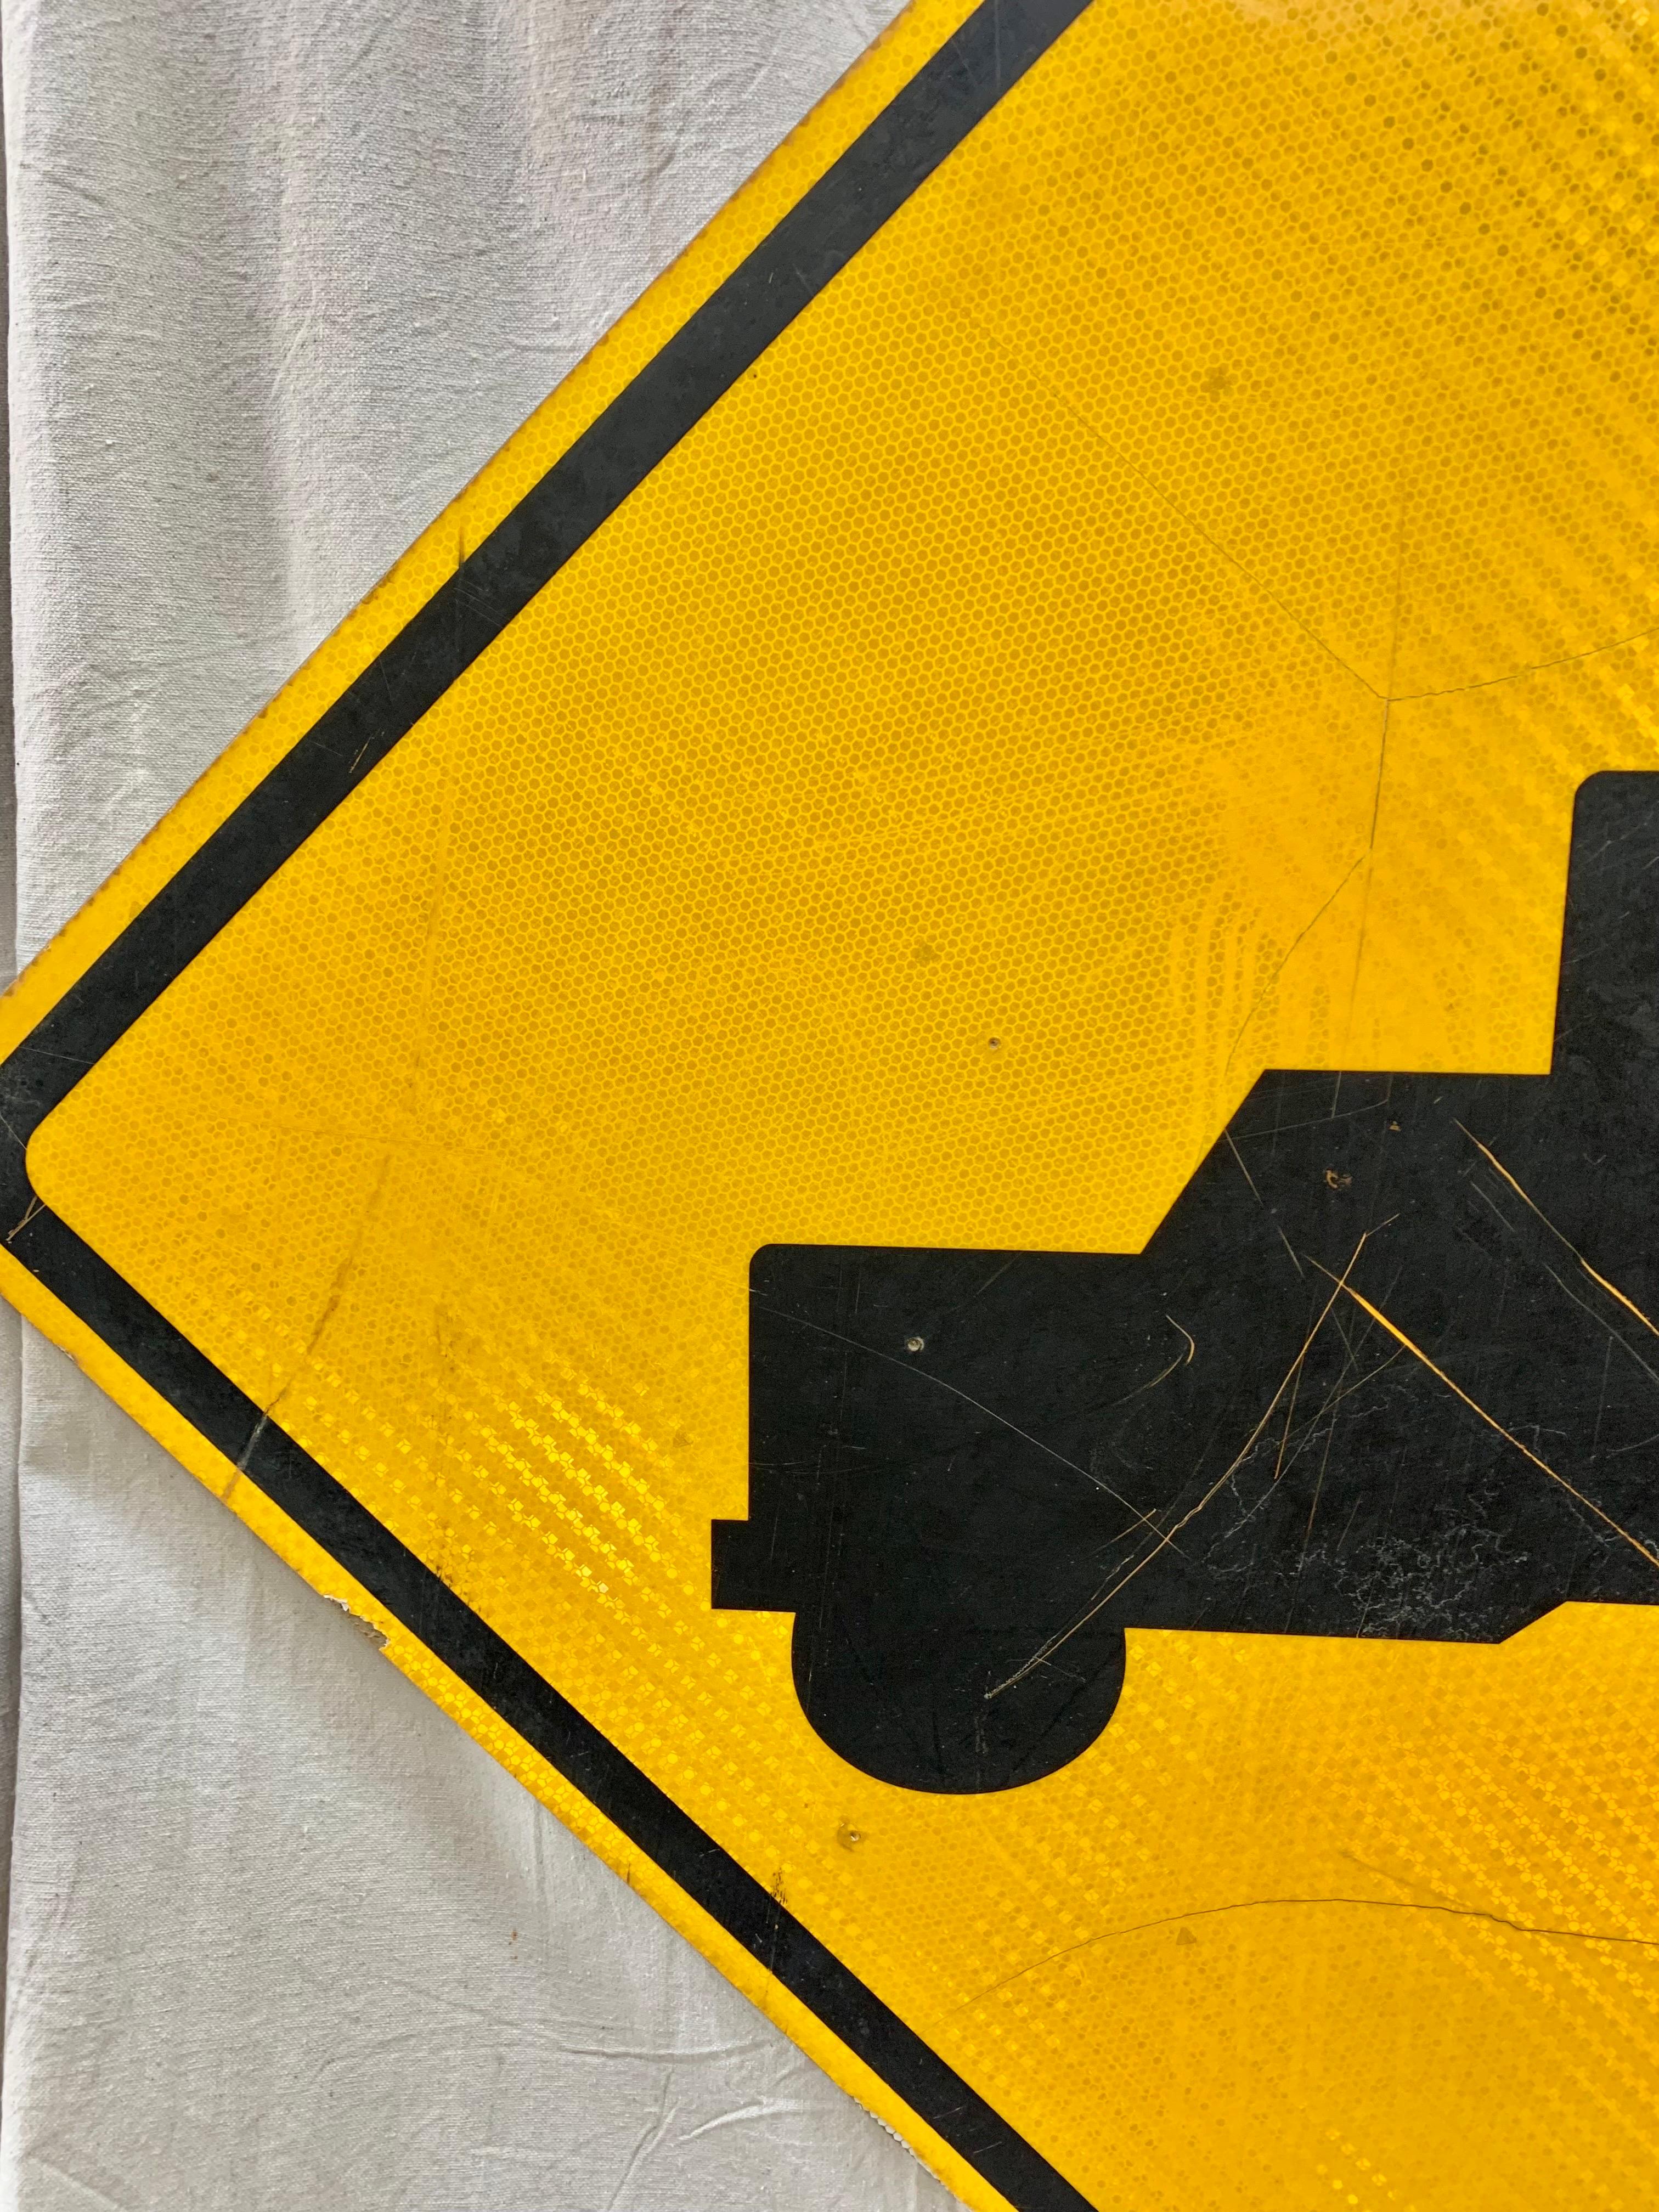 a yellow diamond-shaped sign with a black picture of a truck on it means